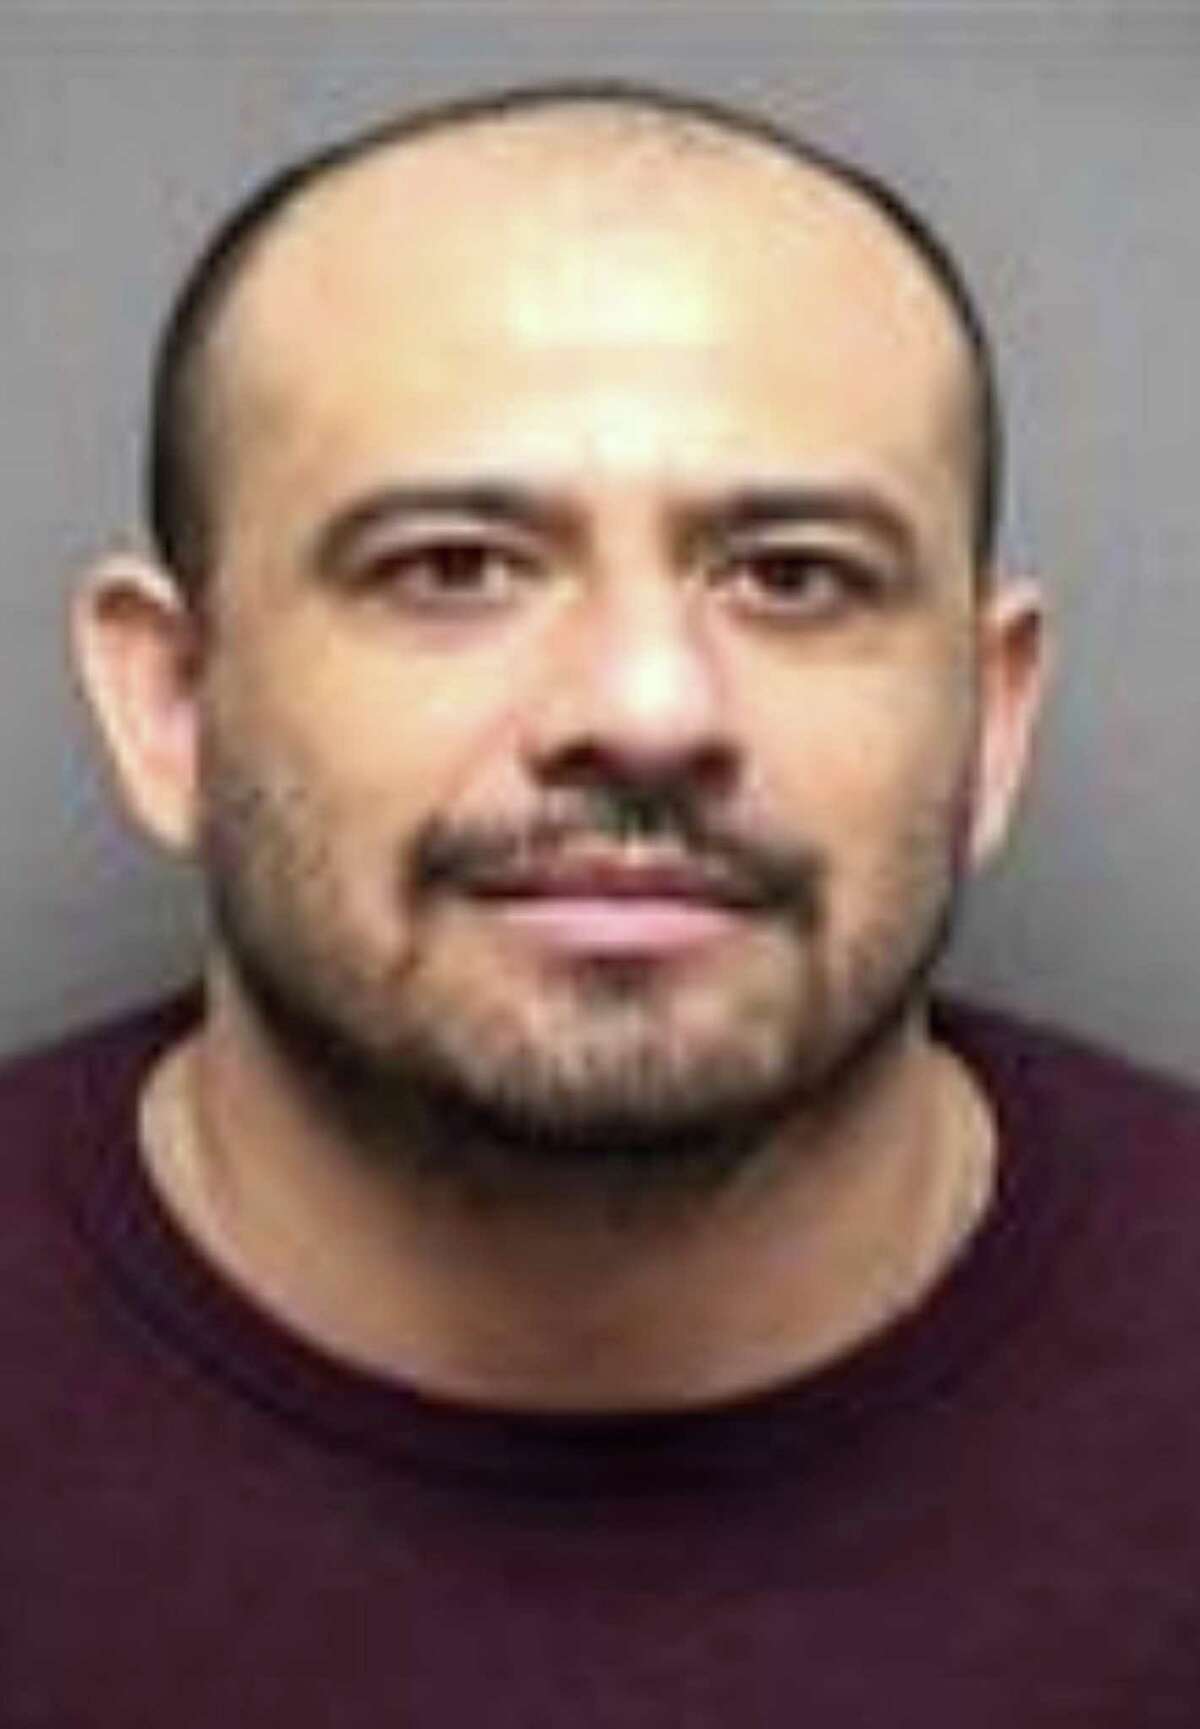 Bexar County jail inmate Vincent Garcia, 40, was killed when two other inmates broke free from their cell at the jail and attacked him, Bexar County Sheriff Javier Salazar said.